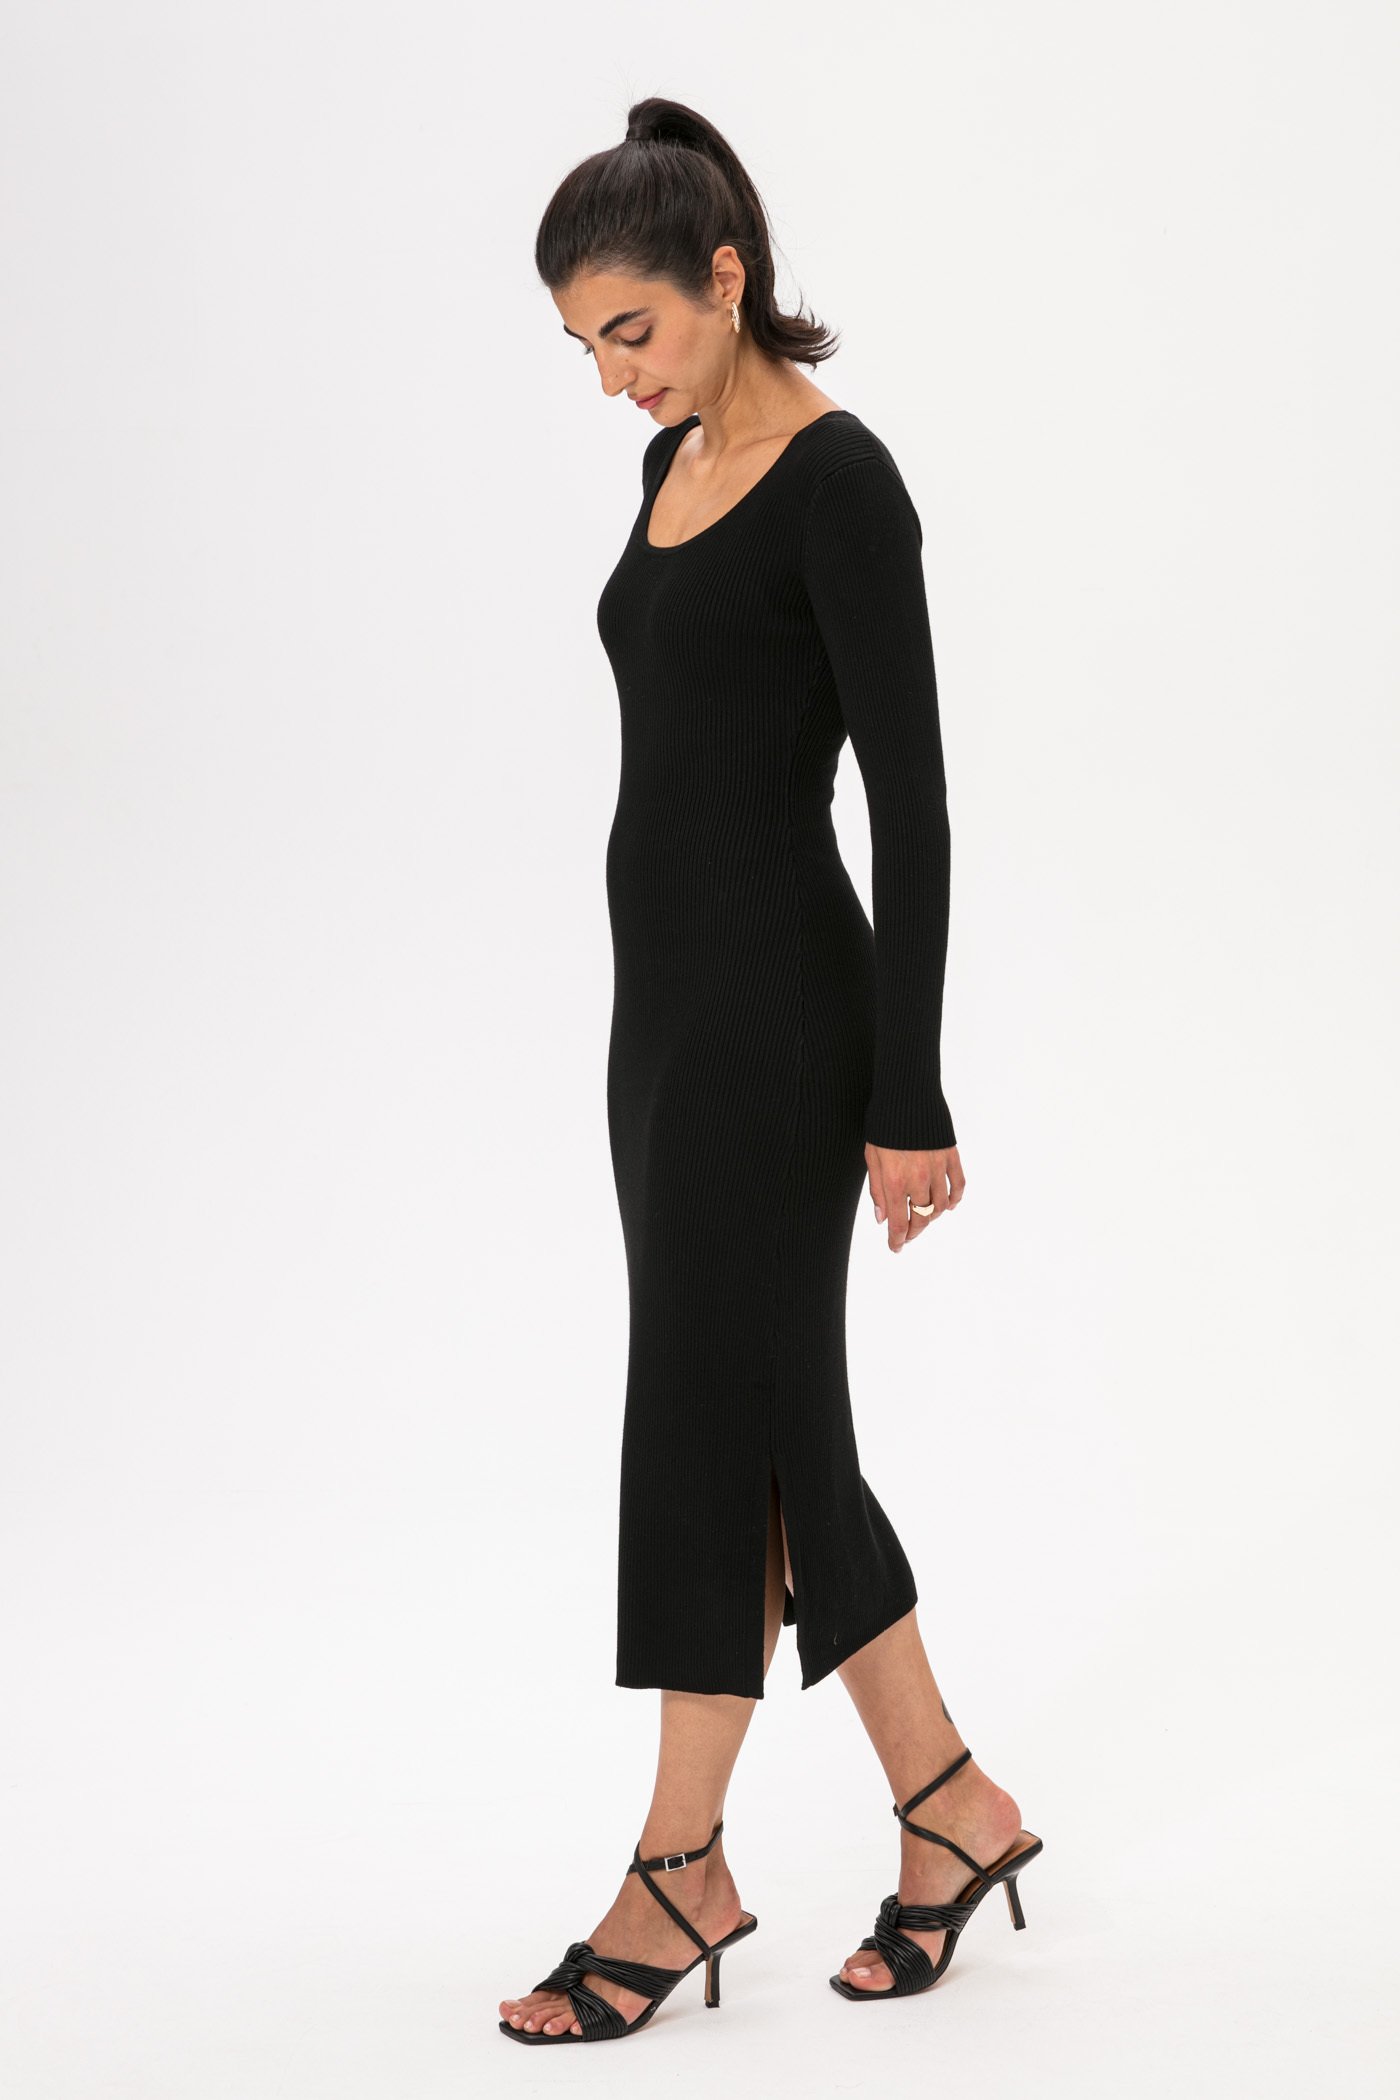 Black knitted dress Image 5